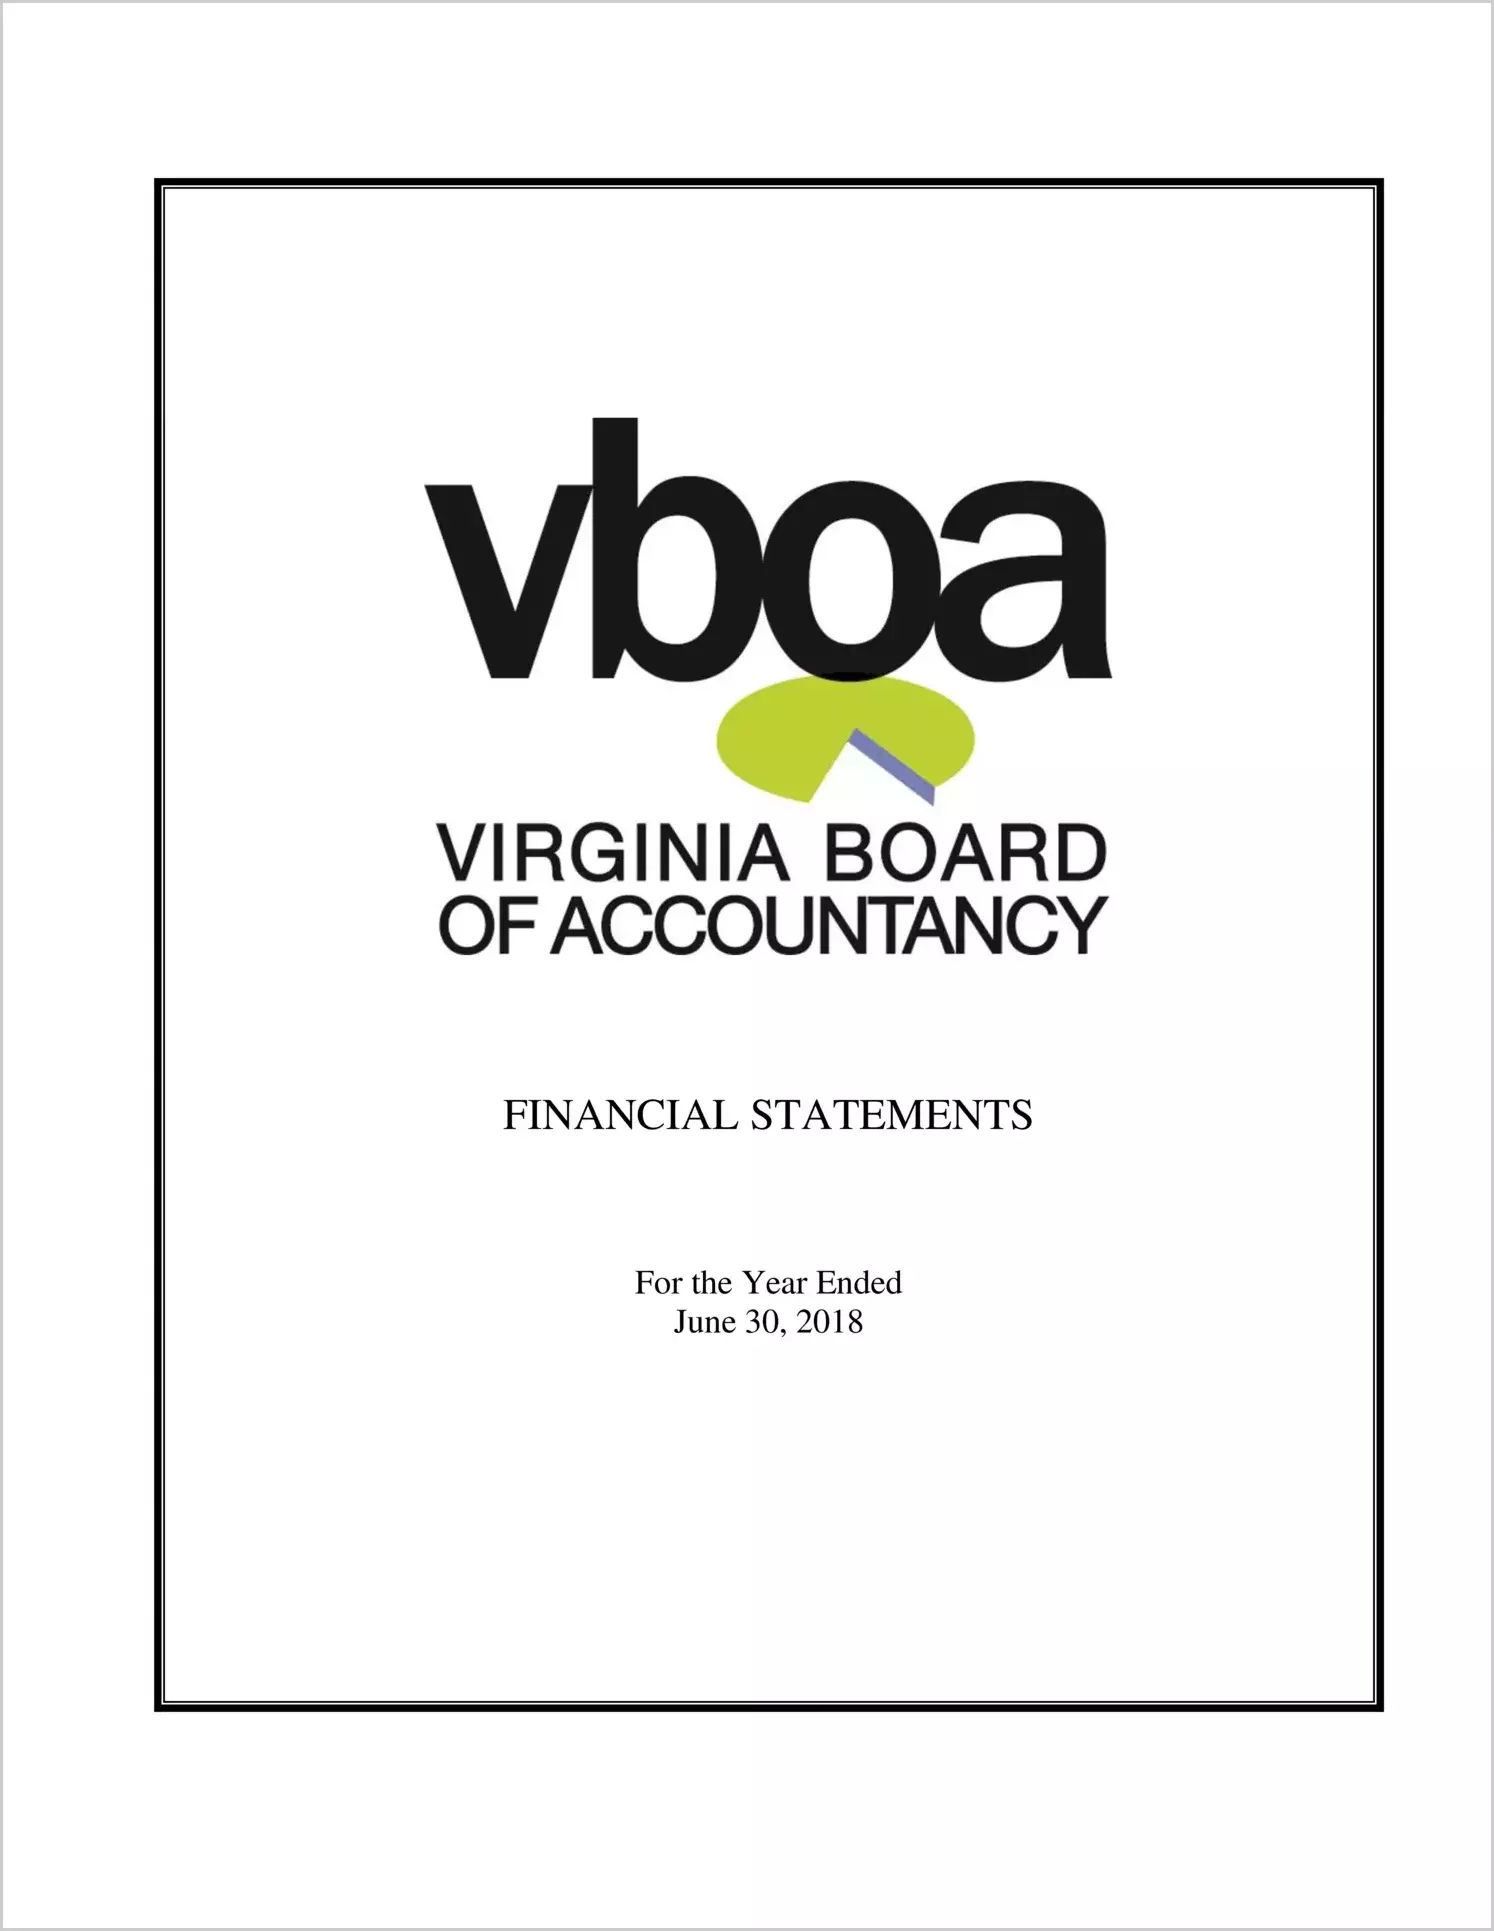 Virginia Board of Accountancy Financial Statements for the year ended June 30, 2018